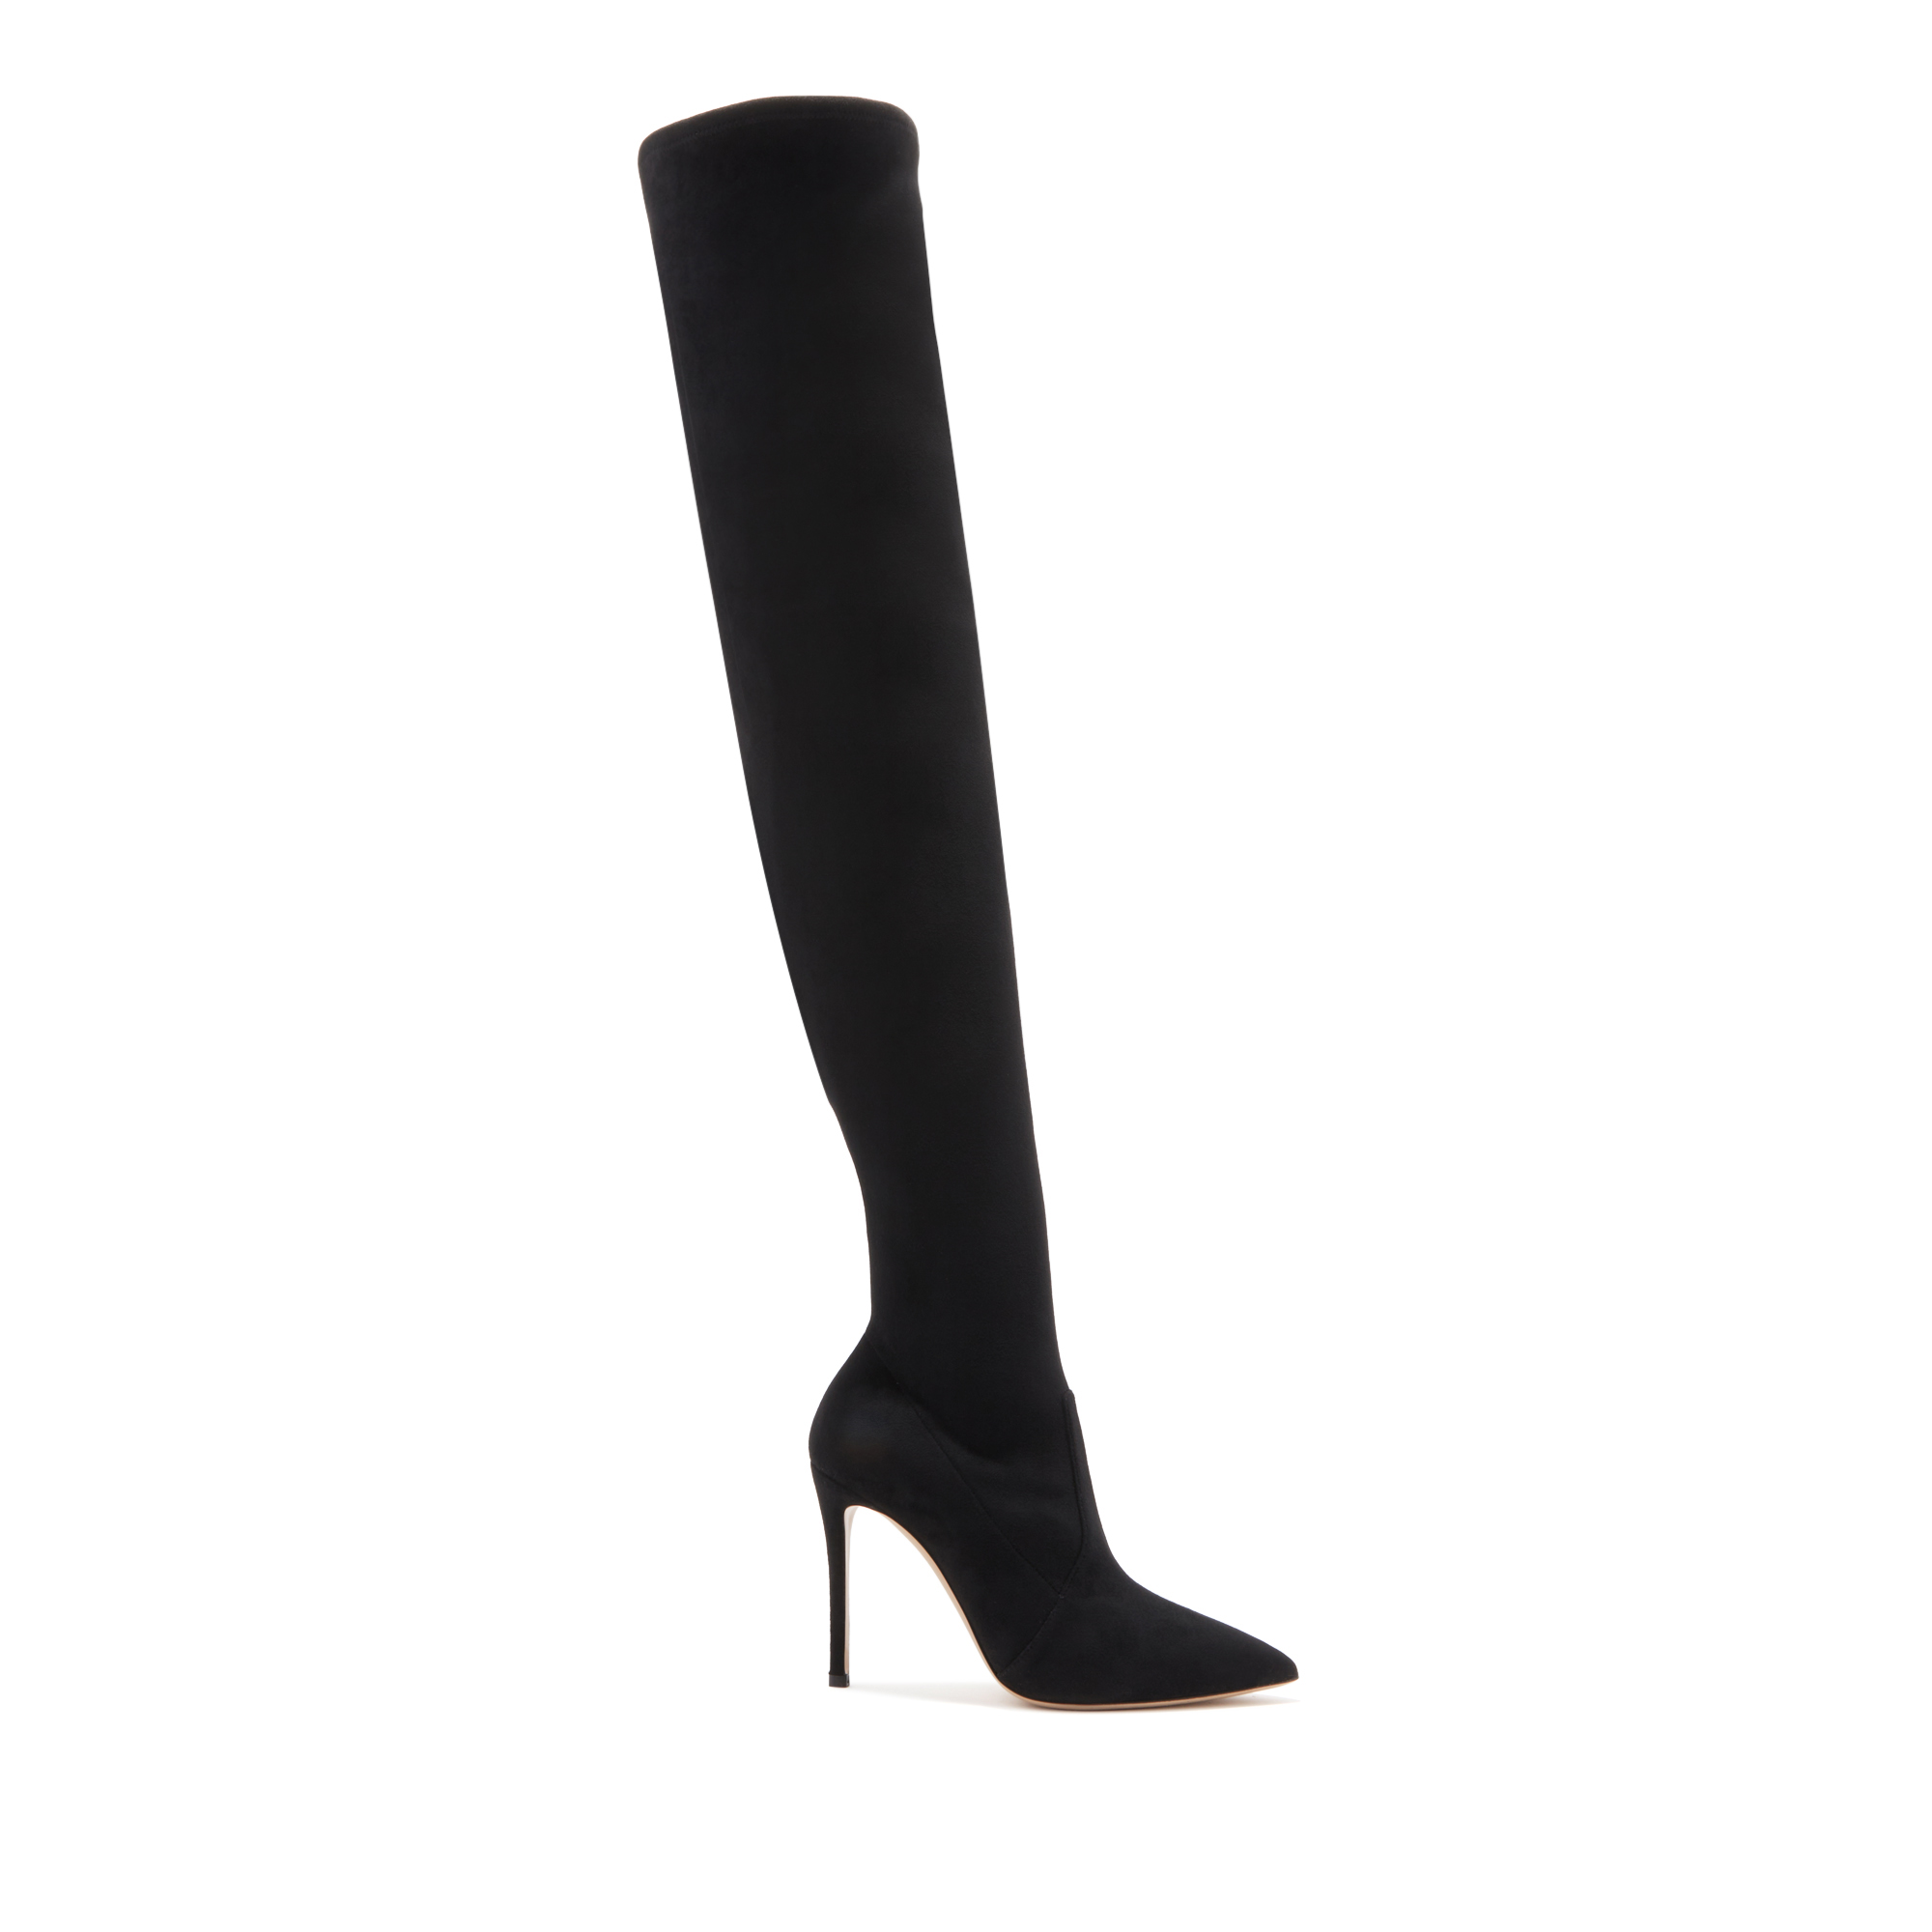 Casadei Julia - Woman Over The Knee Boots Black 38